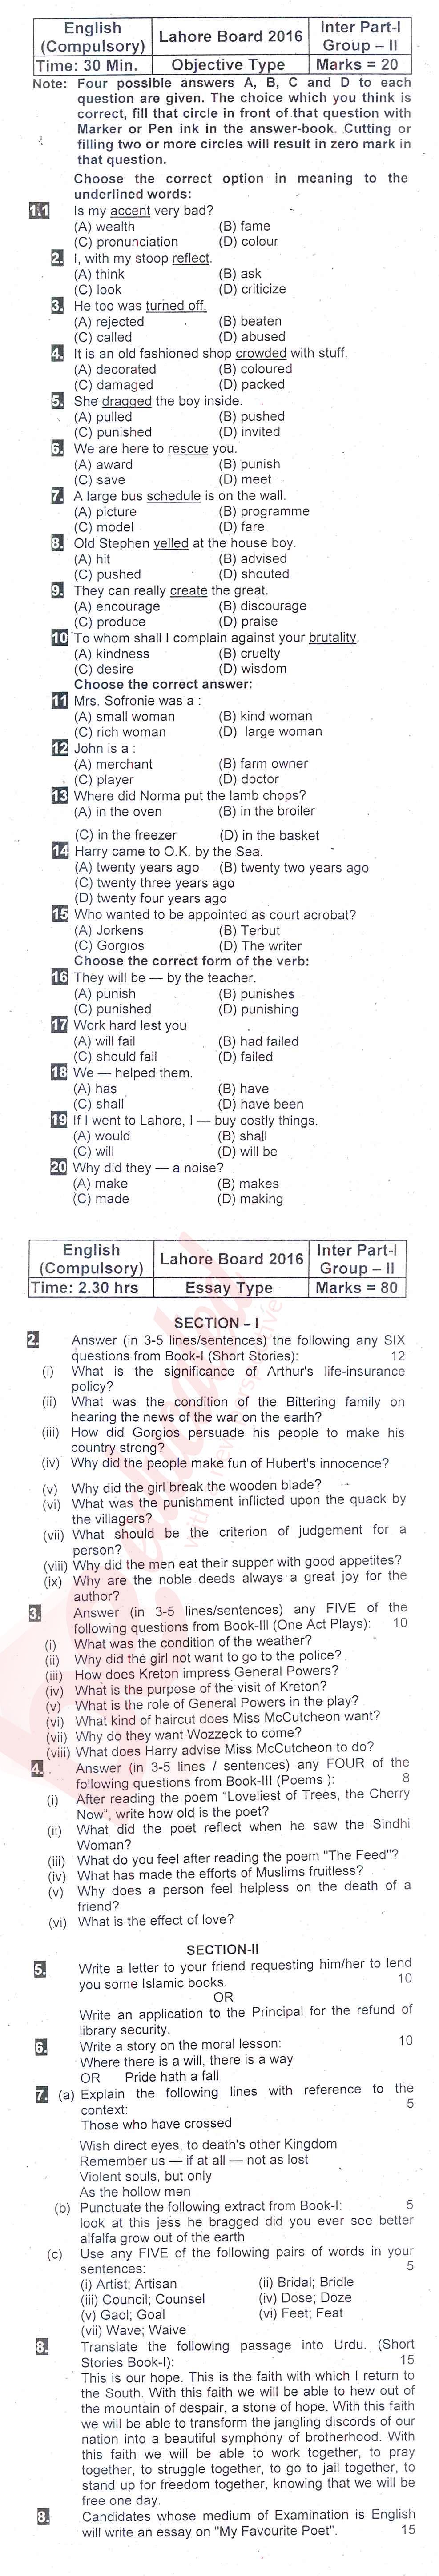 English 11th class Past Paper Group 2 BISE Lahore 2016